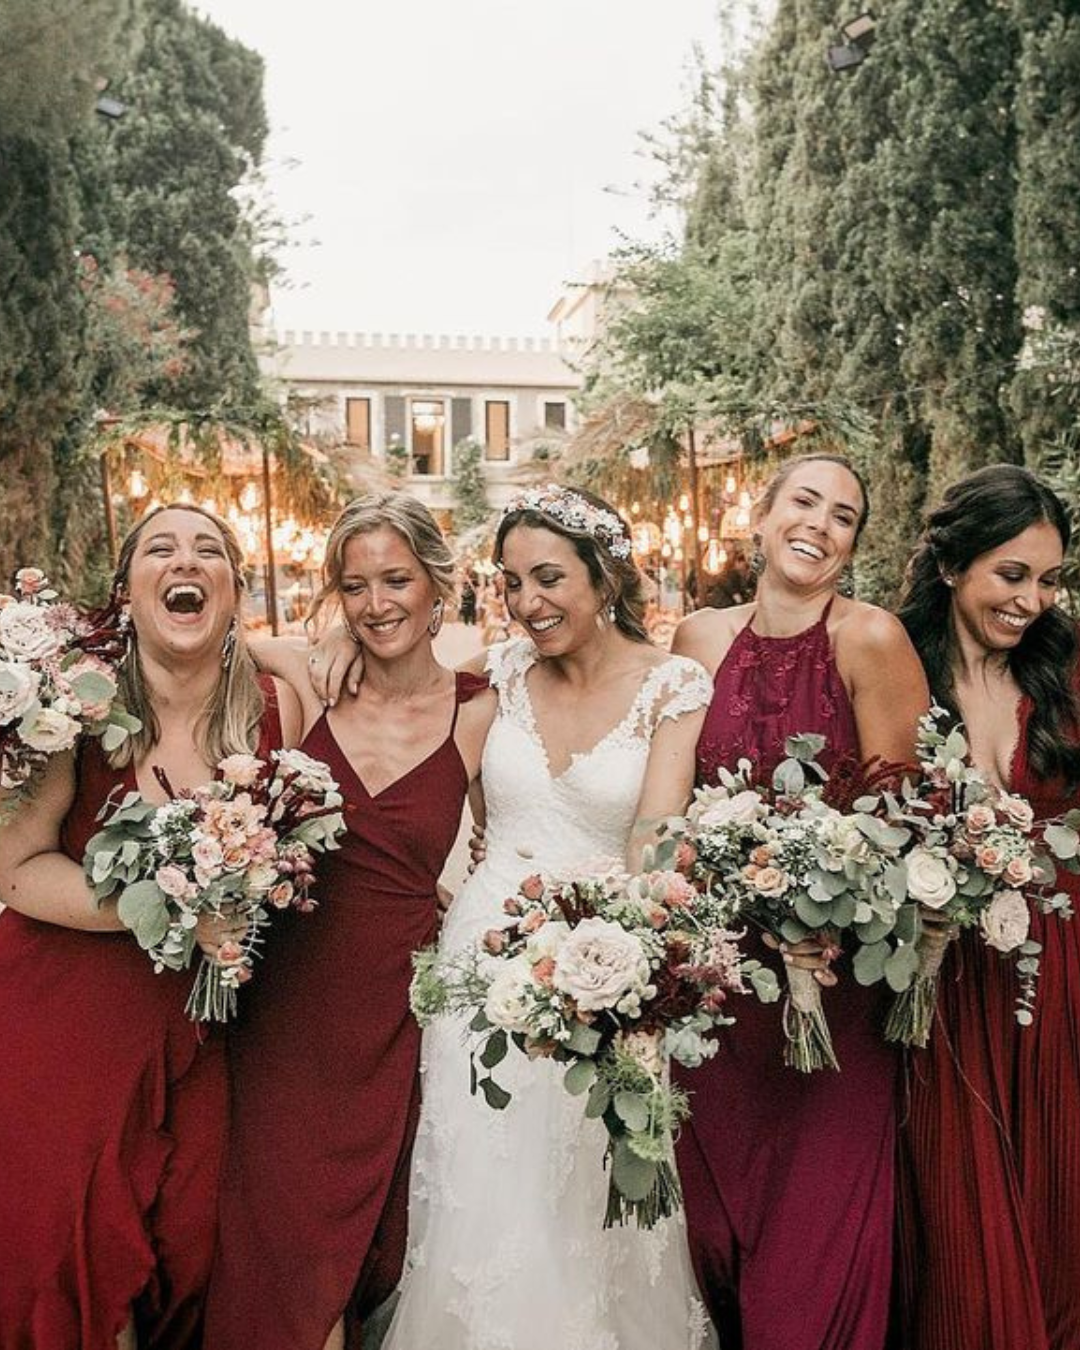 red and white wedding colors bridesmaid dresses ideas of all shades